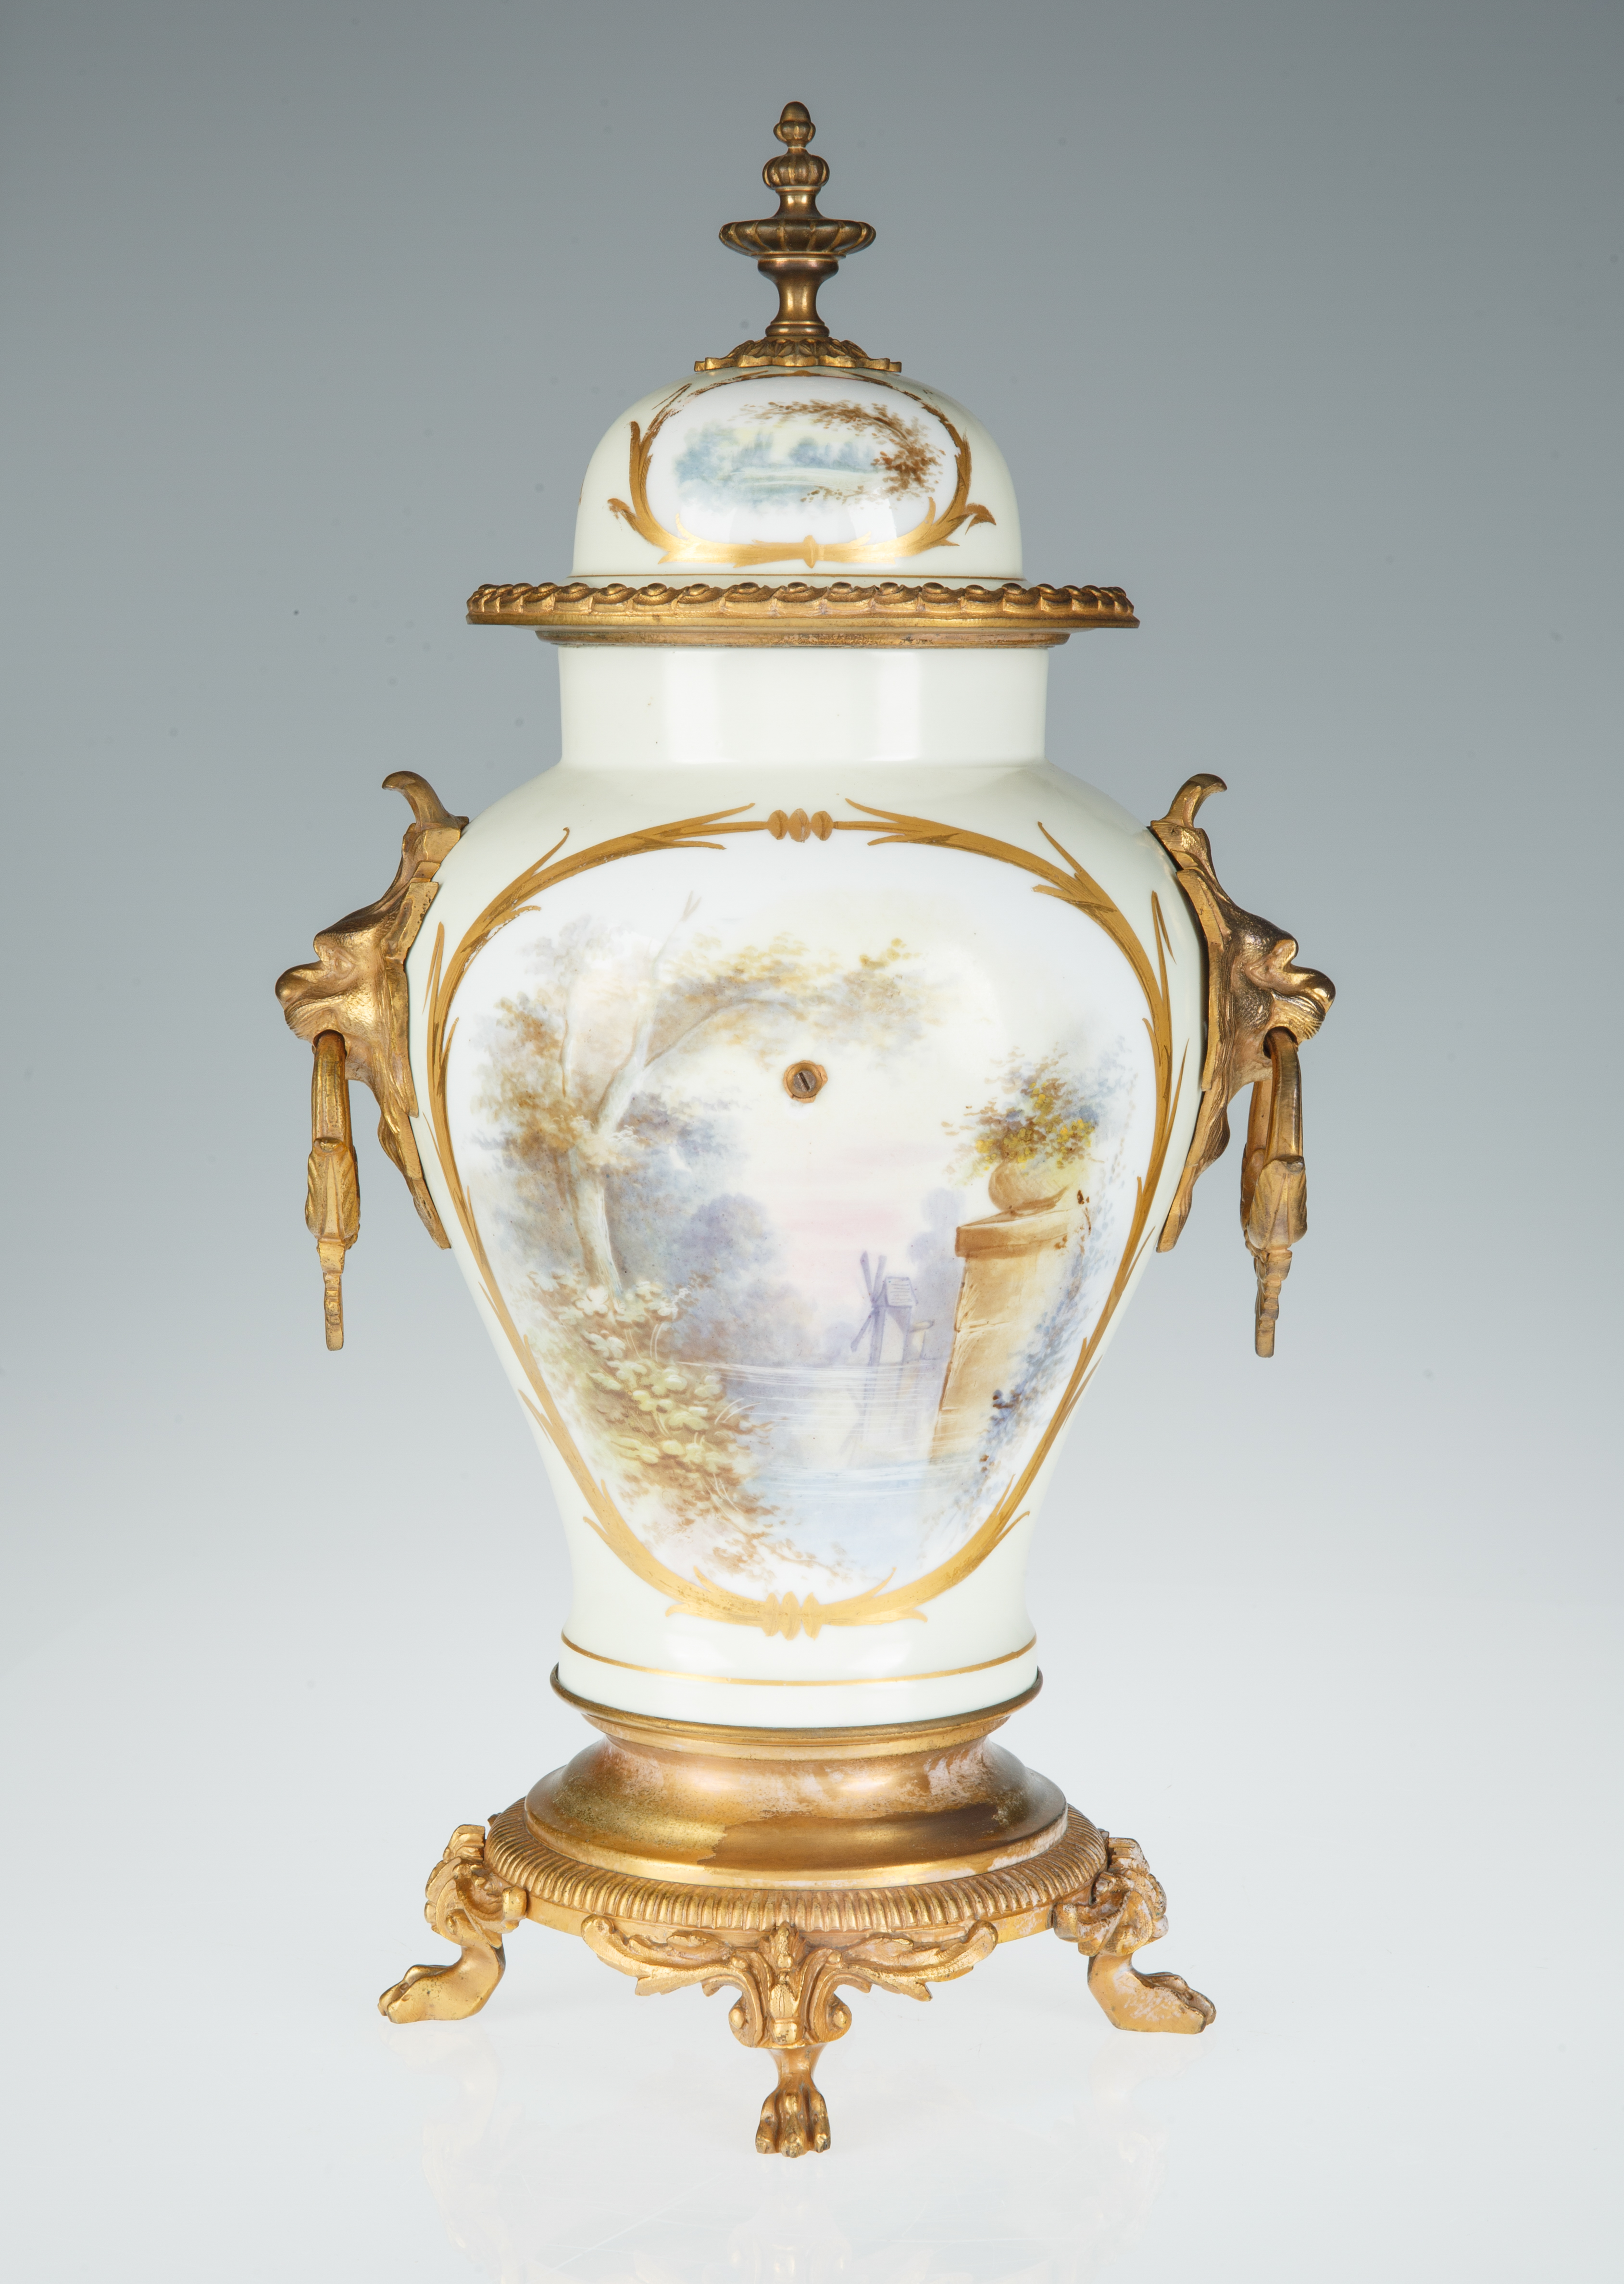 FRENCH PORCELAIN MANTLE CLOCK - Image 2 of 4